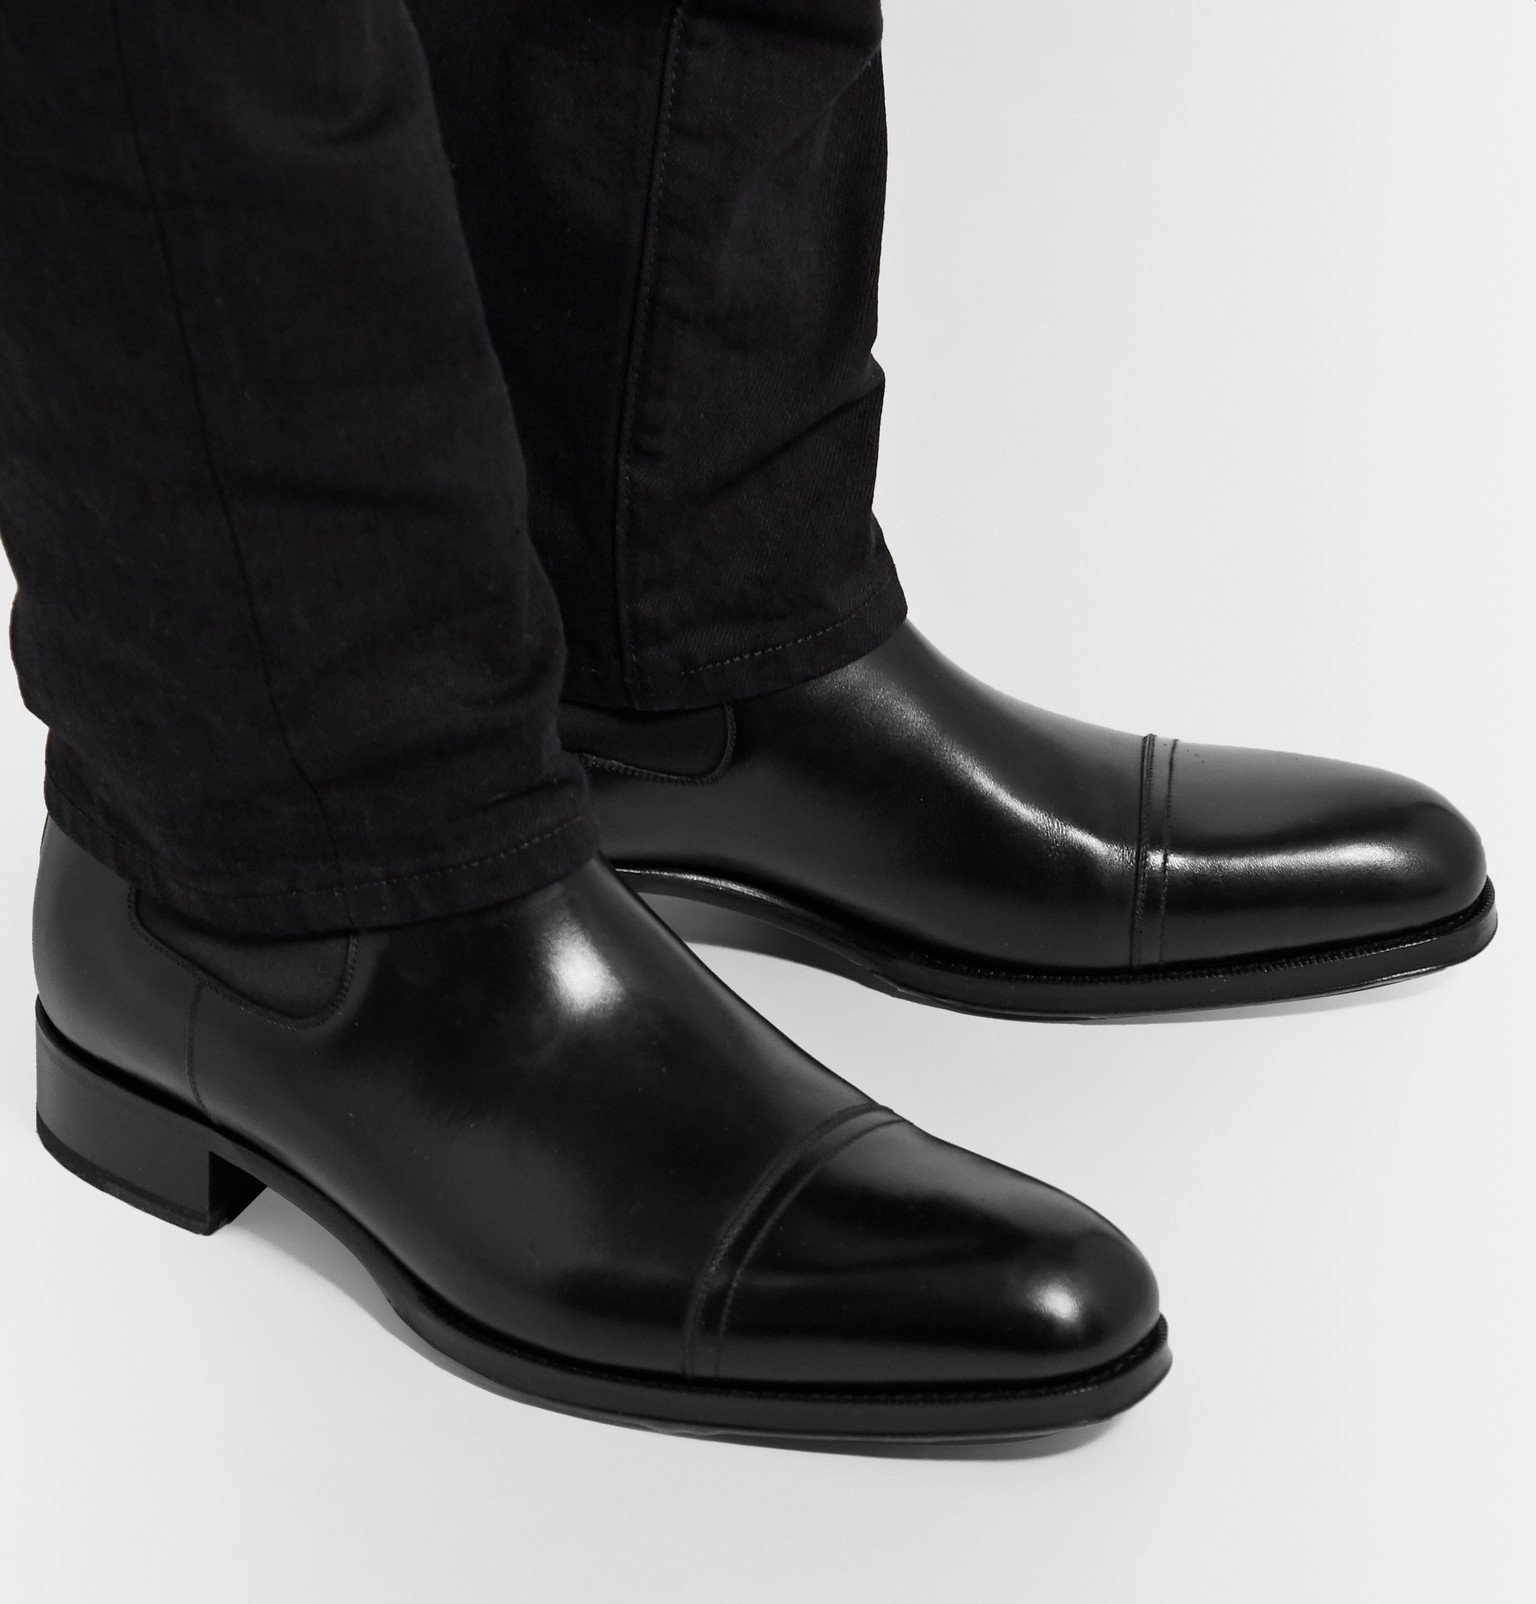 TOM FORD - Edgar Cap-Toe Polished-Leather Chelsea Boots - Black TOM FORD